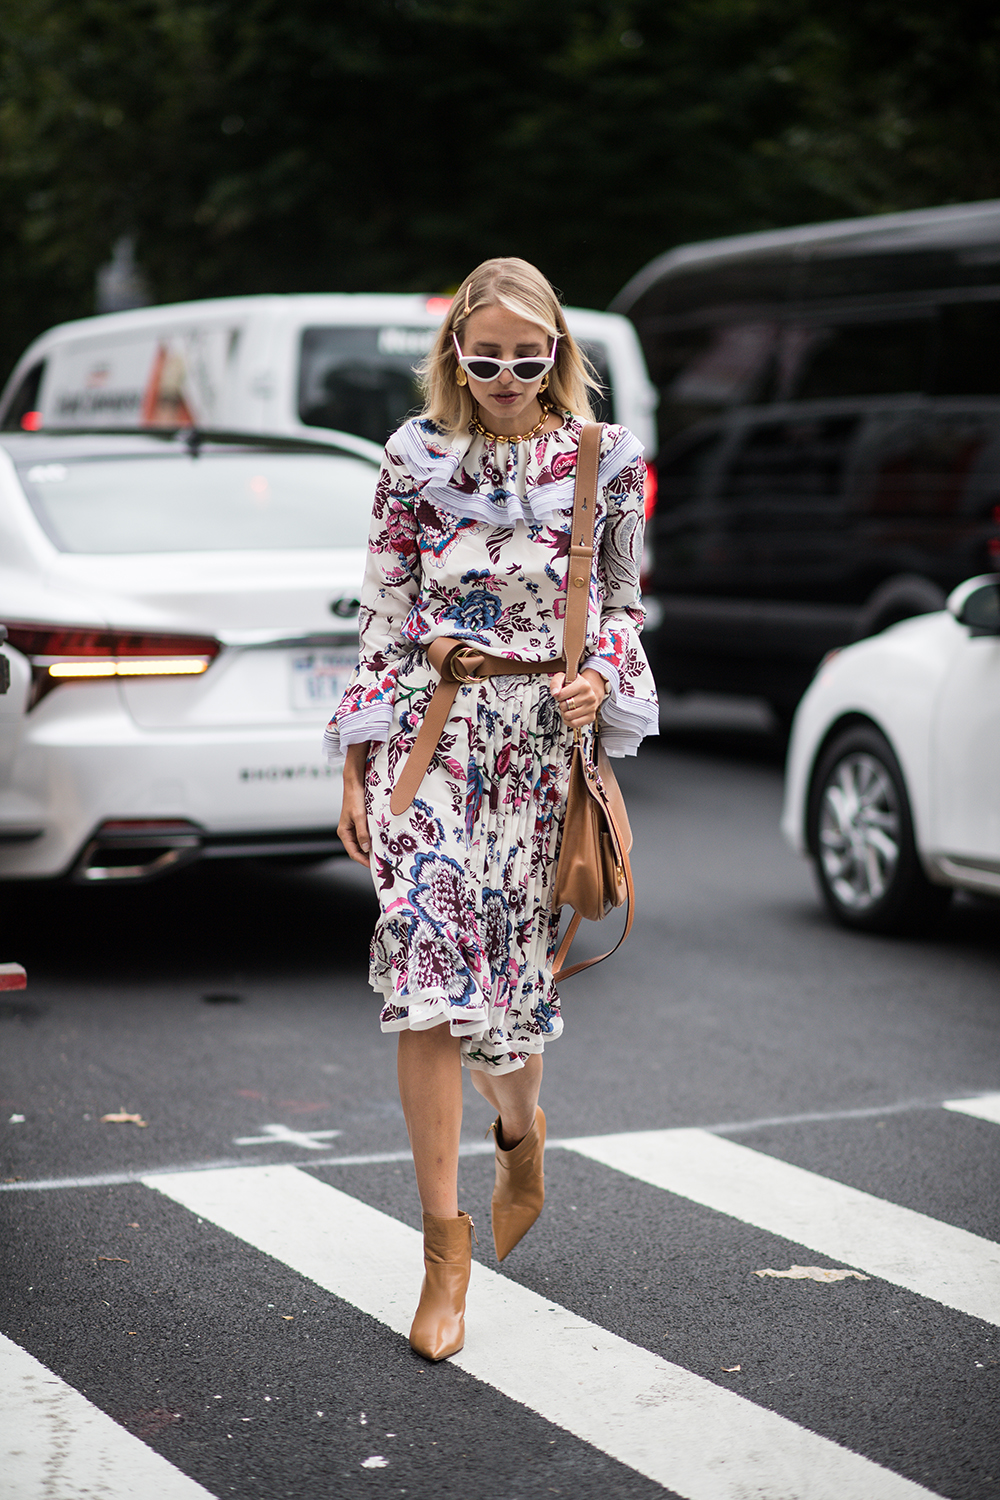 NEW YORK, NY - SEPTEMBER 07: Leonie Hanne seen in the streets of Manhattan during the New York Fashion Week SS19 on September 7, 2018 in New York City. (Photo by Timur Emek/Getty Images)